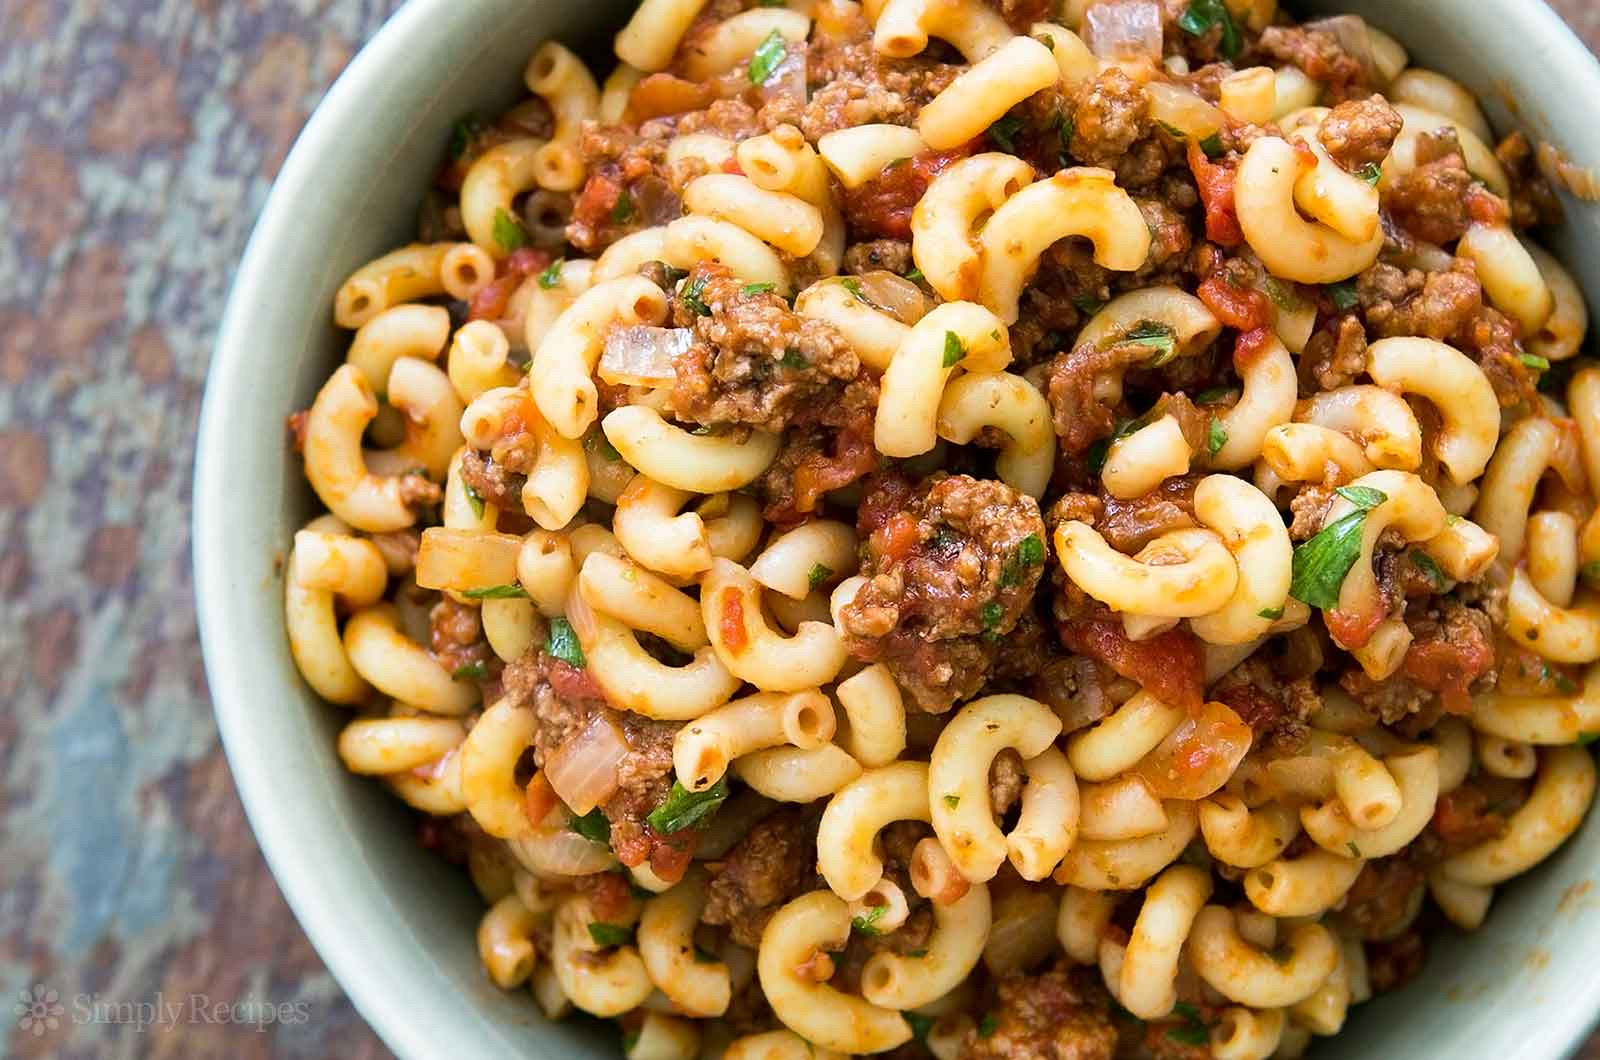 Recipes That Use Ground Beef
 ground beef recipes